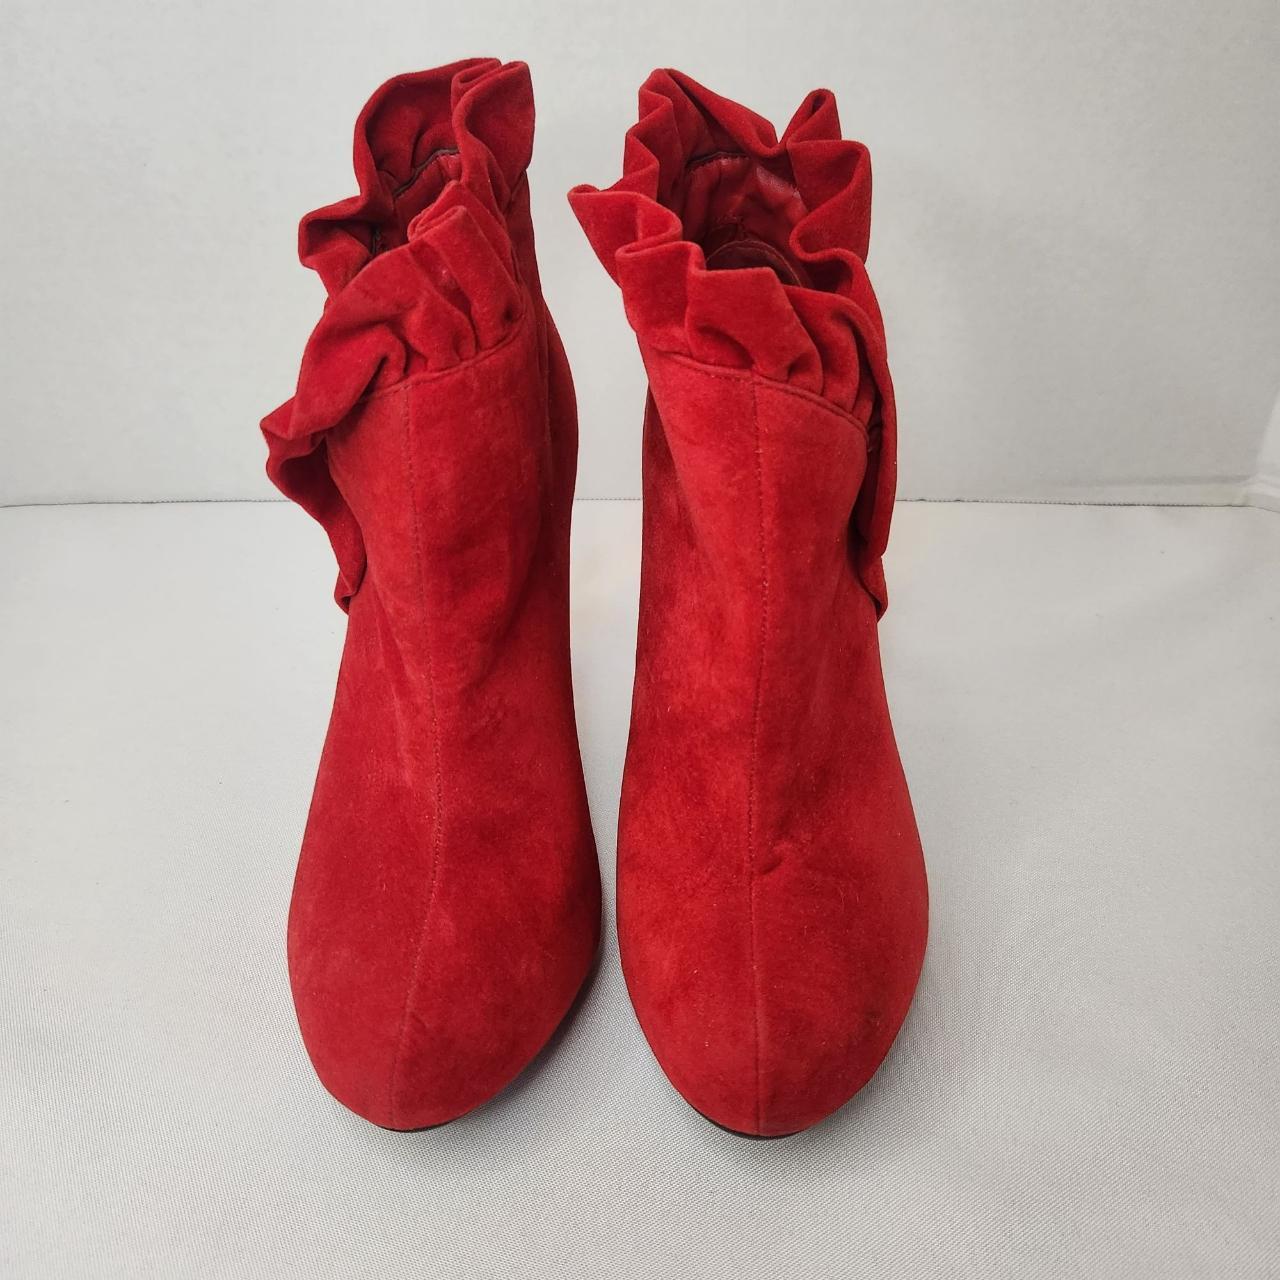 New Bamboo Women's Red Suede 4.5